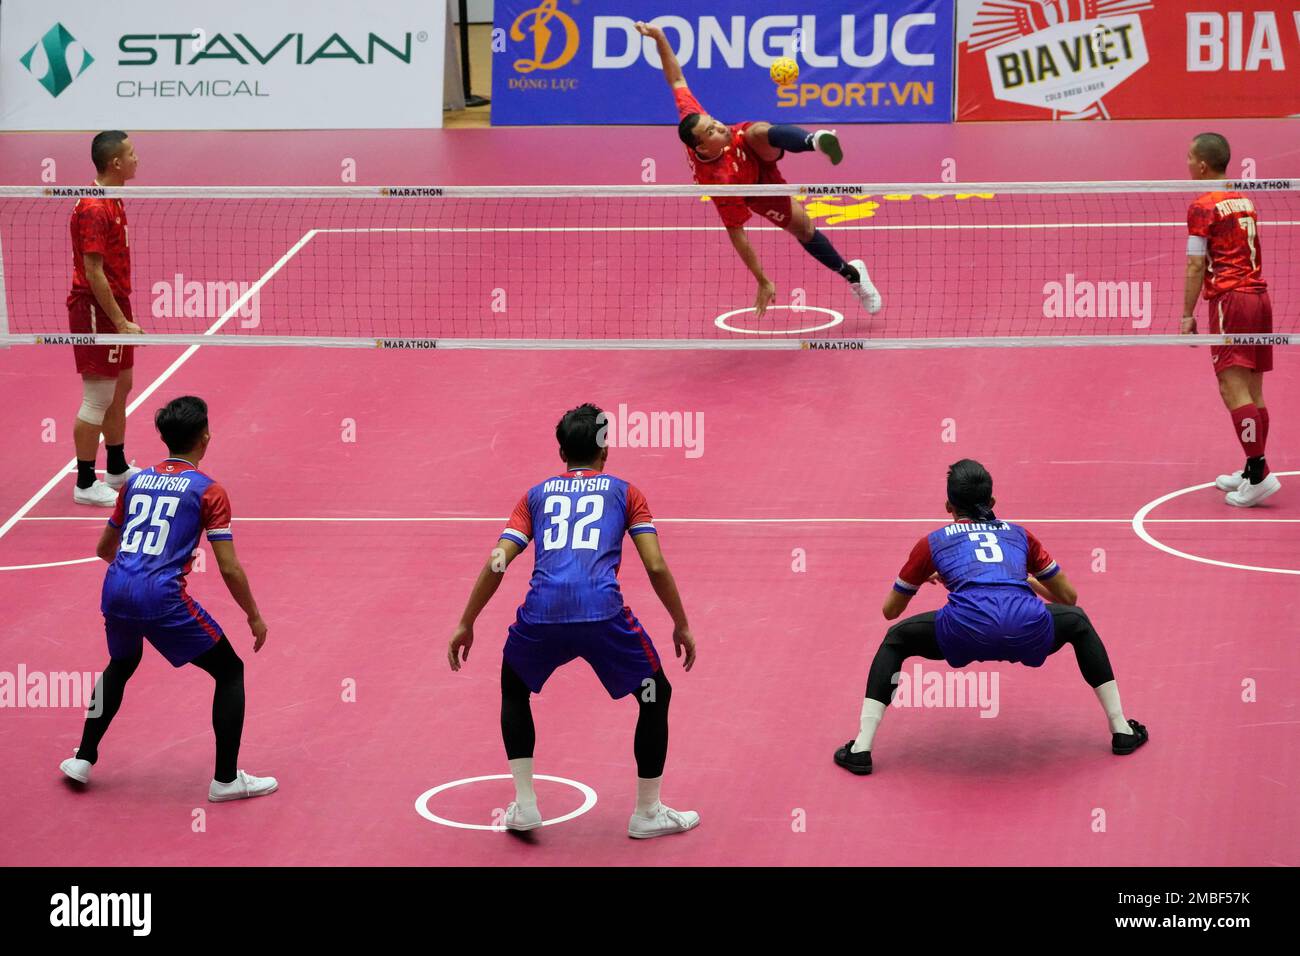 Siriwat Sakha of Thailand, left, center, kick a ball during the final mens regu Sepaktakraw match between Thailand and Malaysia at the 31st Southeast Asian Games (SEA Games 31) in Hanoi, Vietnam,